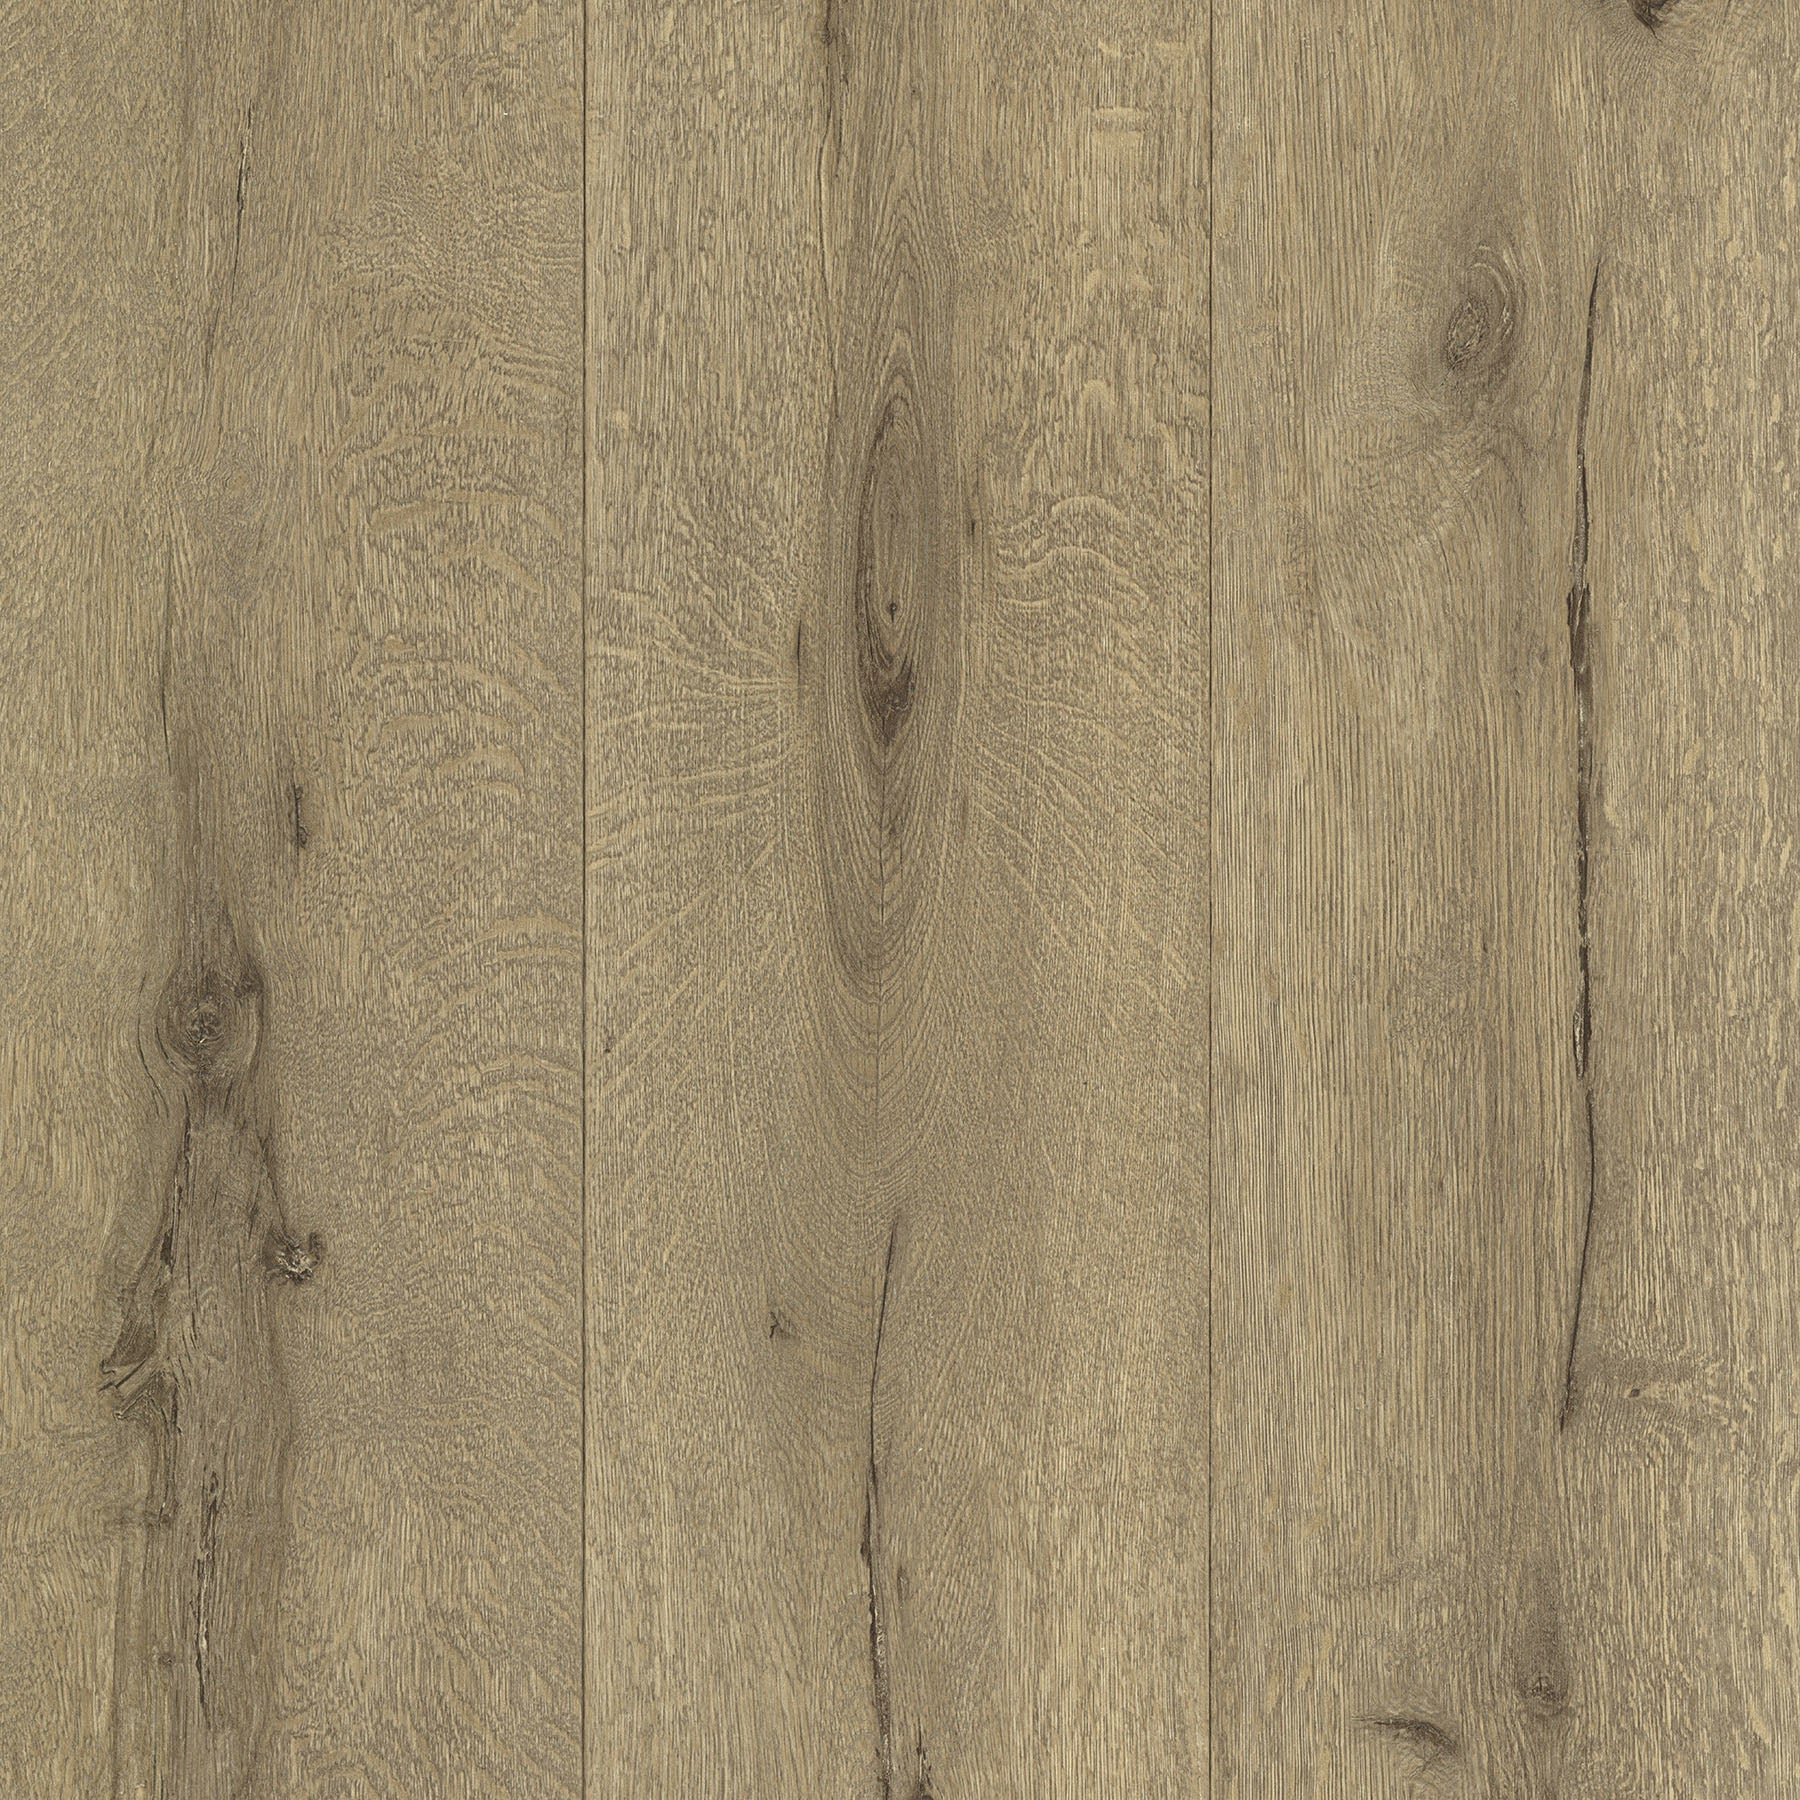 Order 2774-514421 Stones & Woods Browns Wood Paneling Wallpaper by Advantage